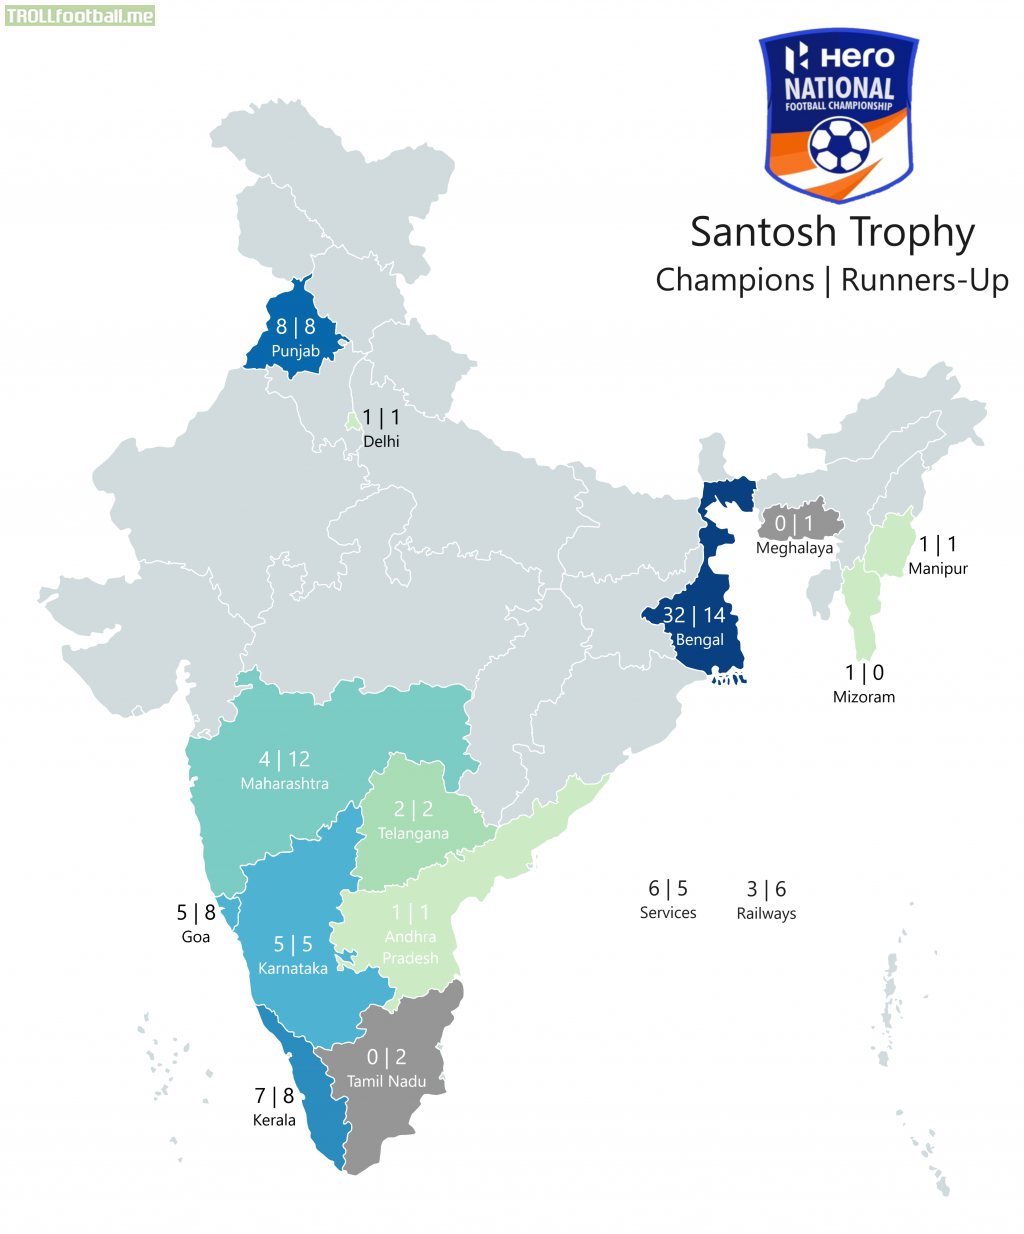 You can have assume where football is popular in India just by looking how many National Football Championship each state has won